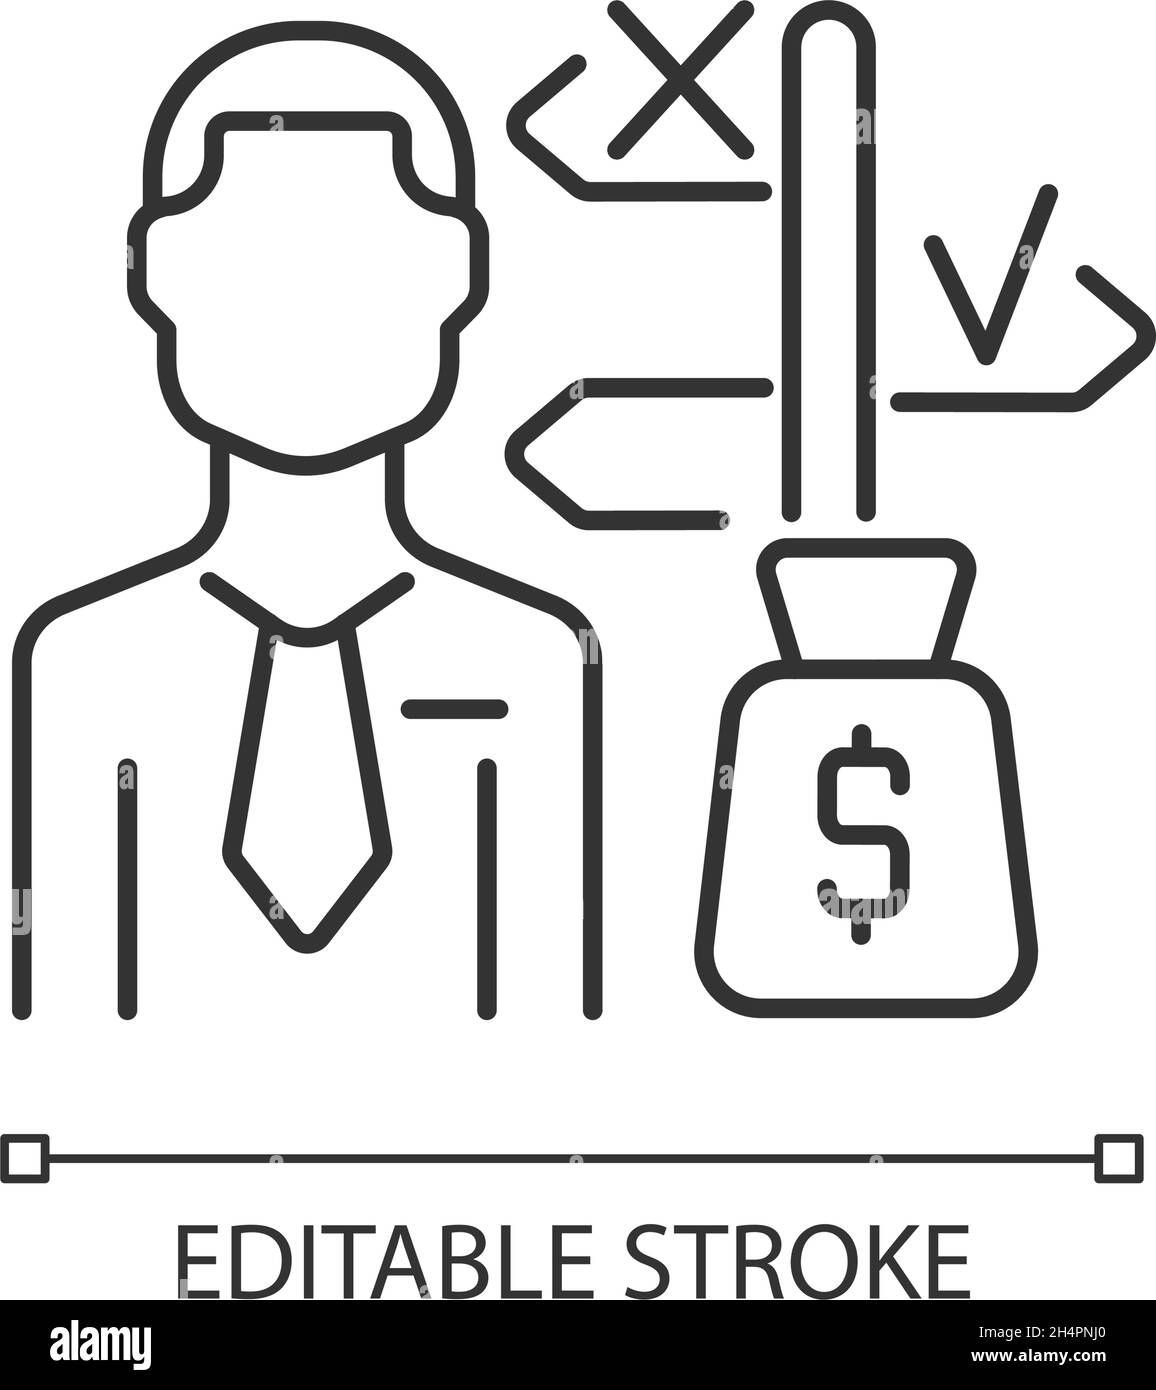 Asset manager linear icon Stock Vector